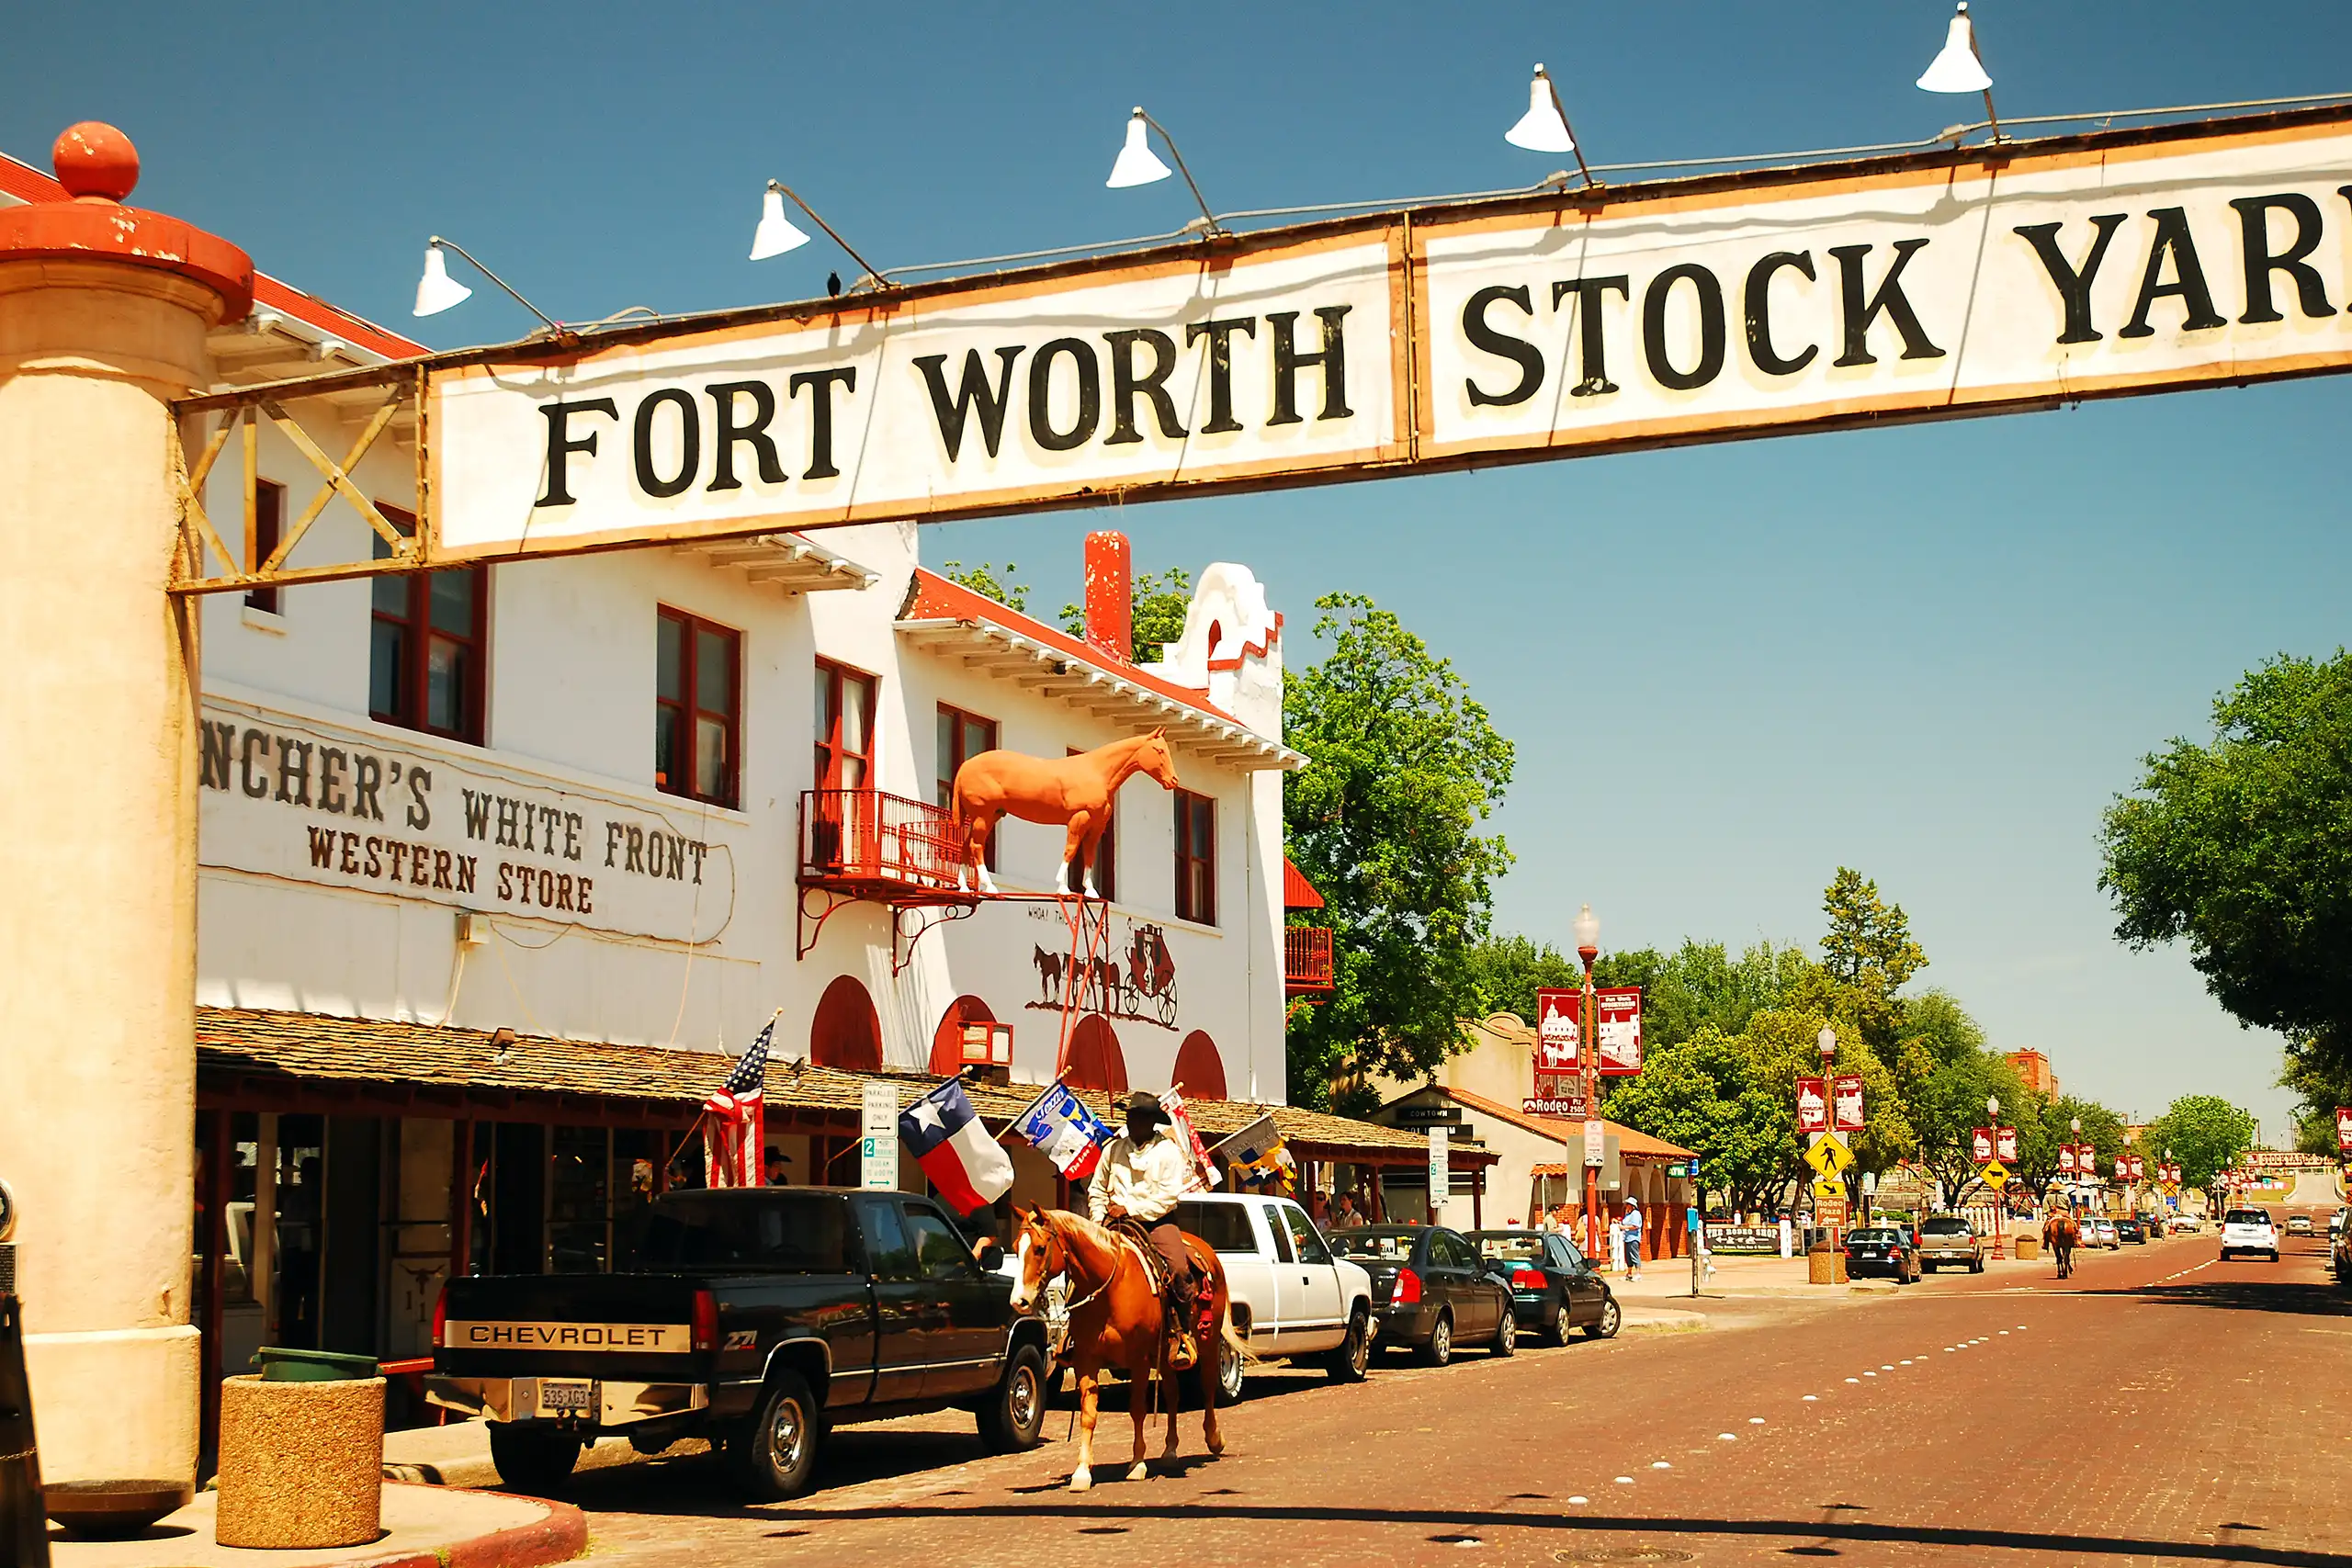 A sheriff patrols the streets of the Fort Worth Stockyards while riding on a horse